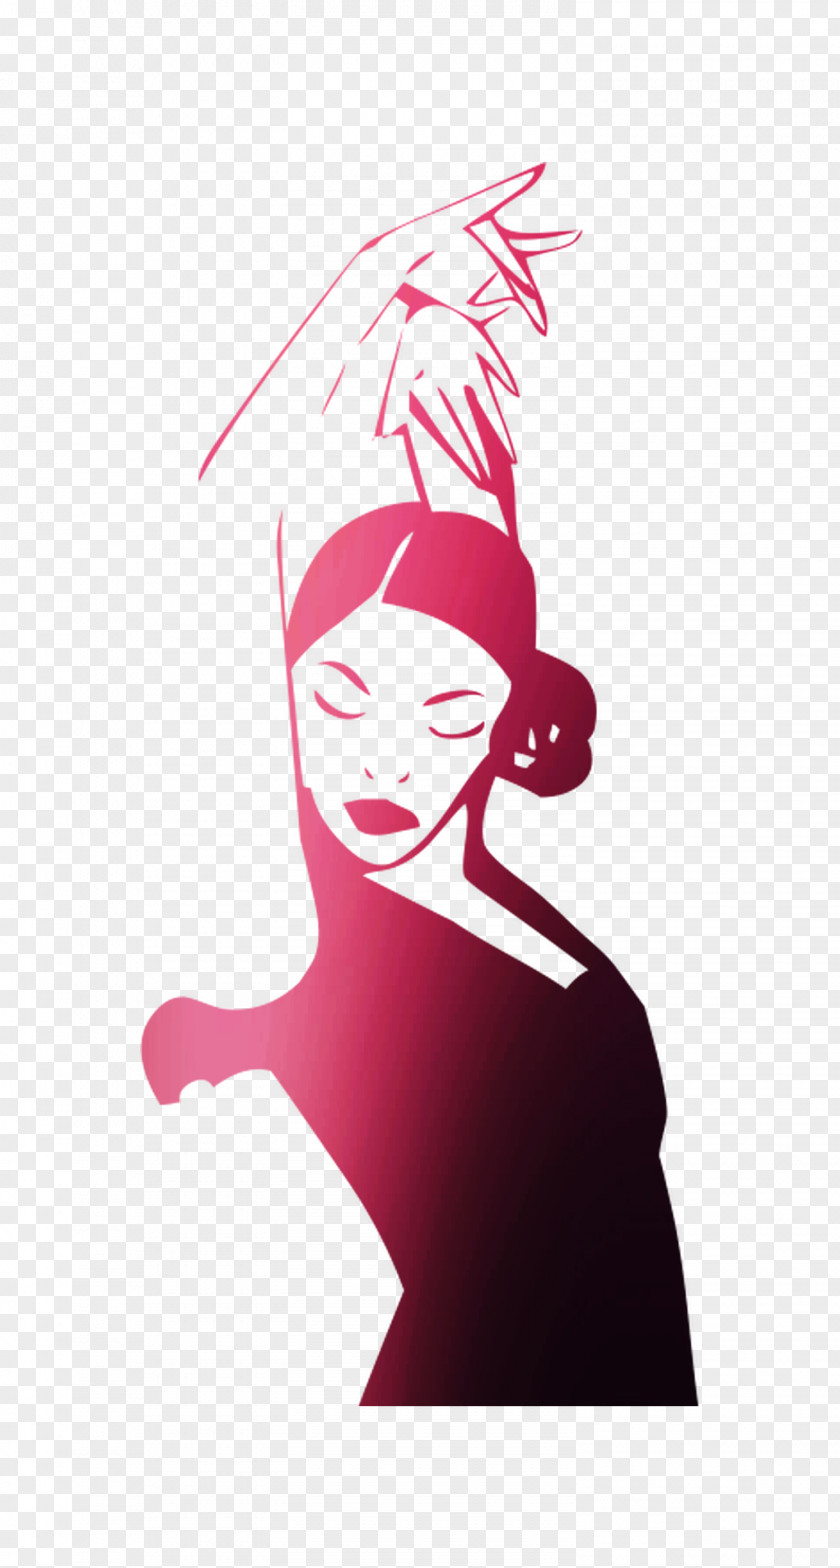 Illustration Opgebrand Flamenco Dance Stock Photography PNG